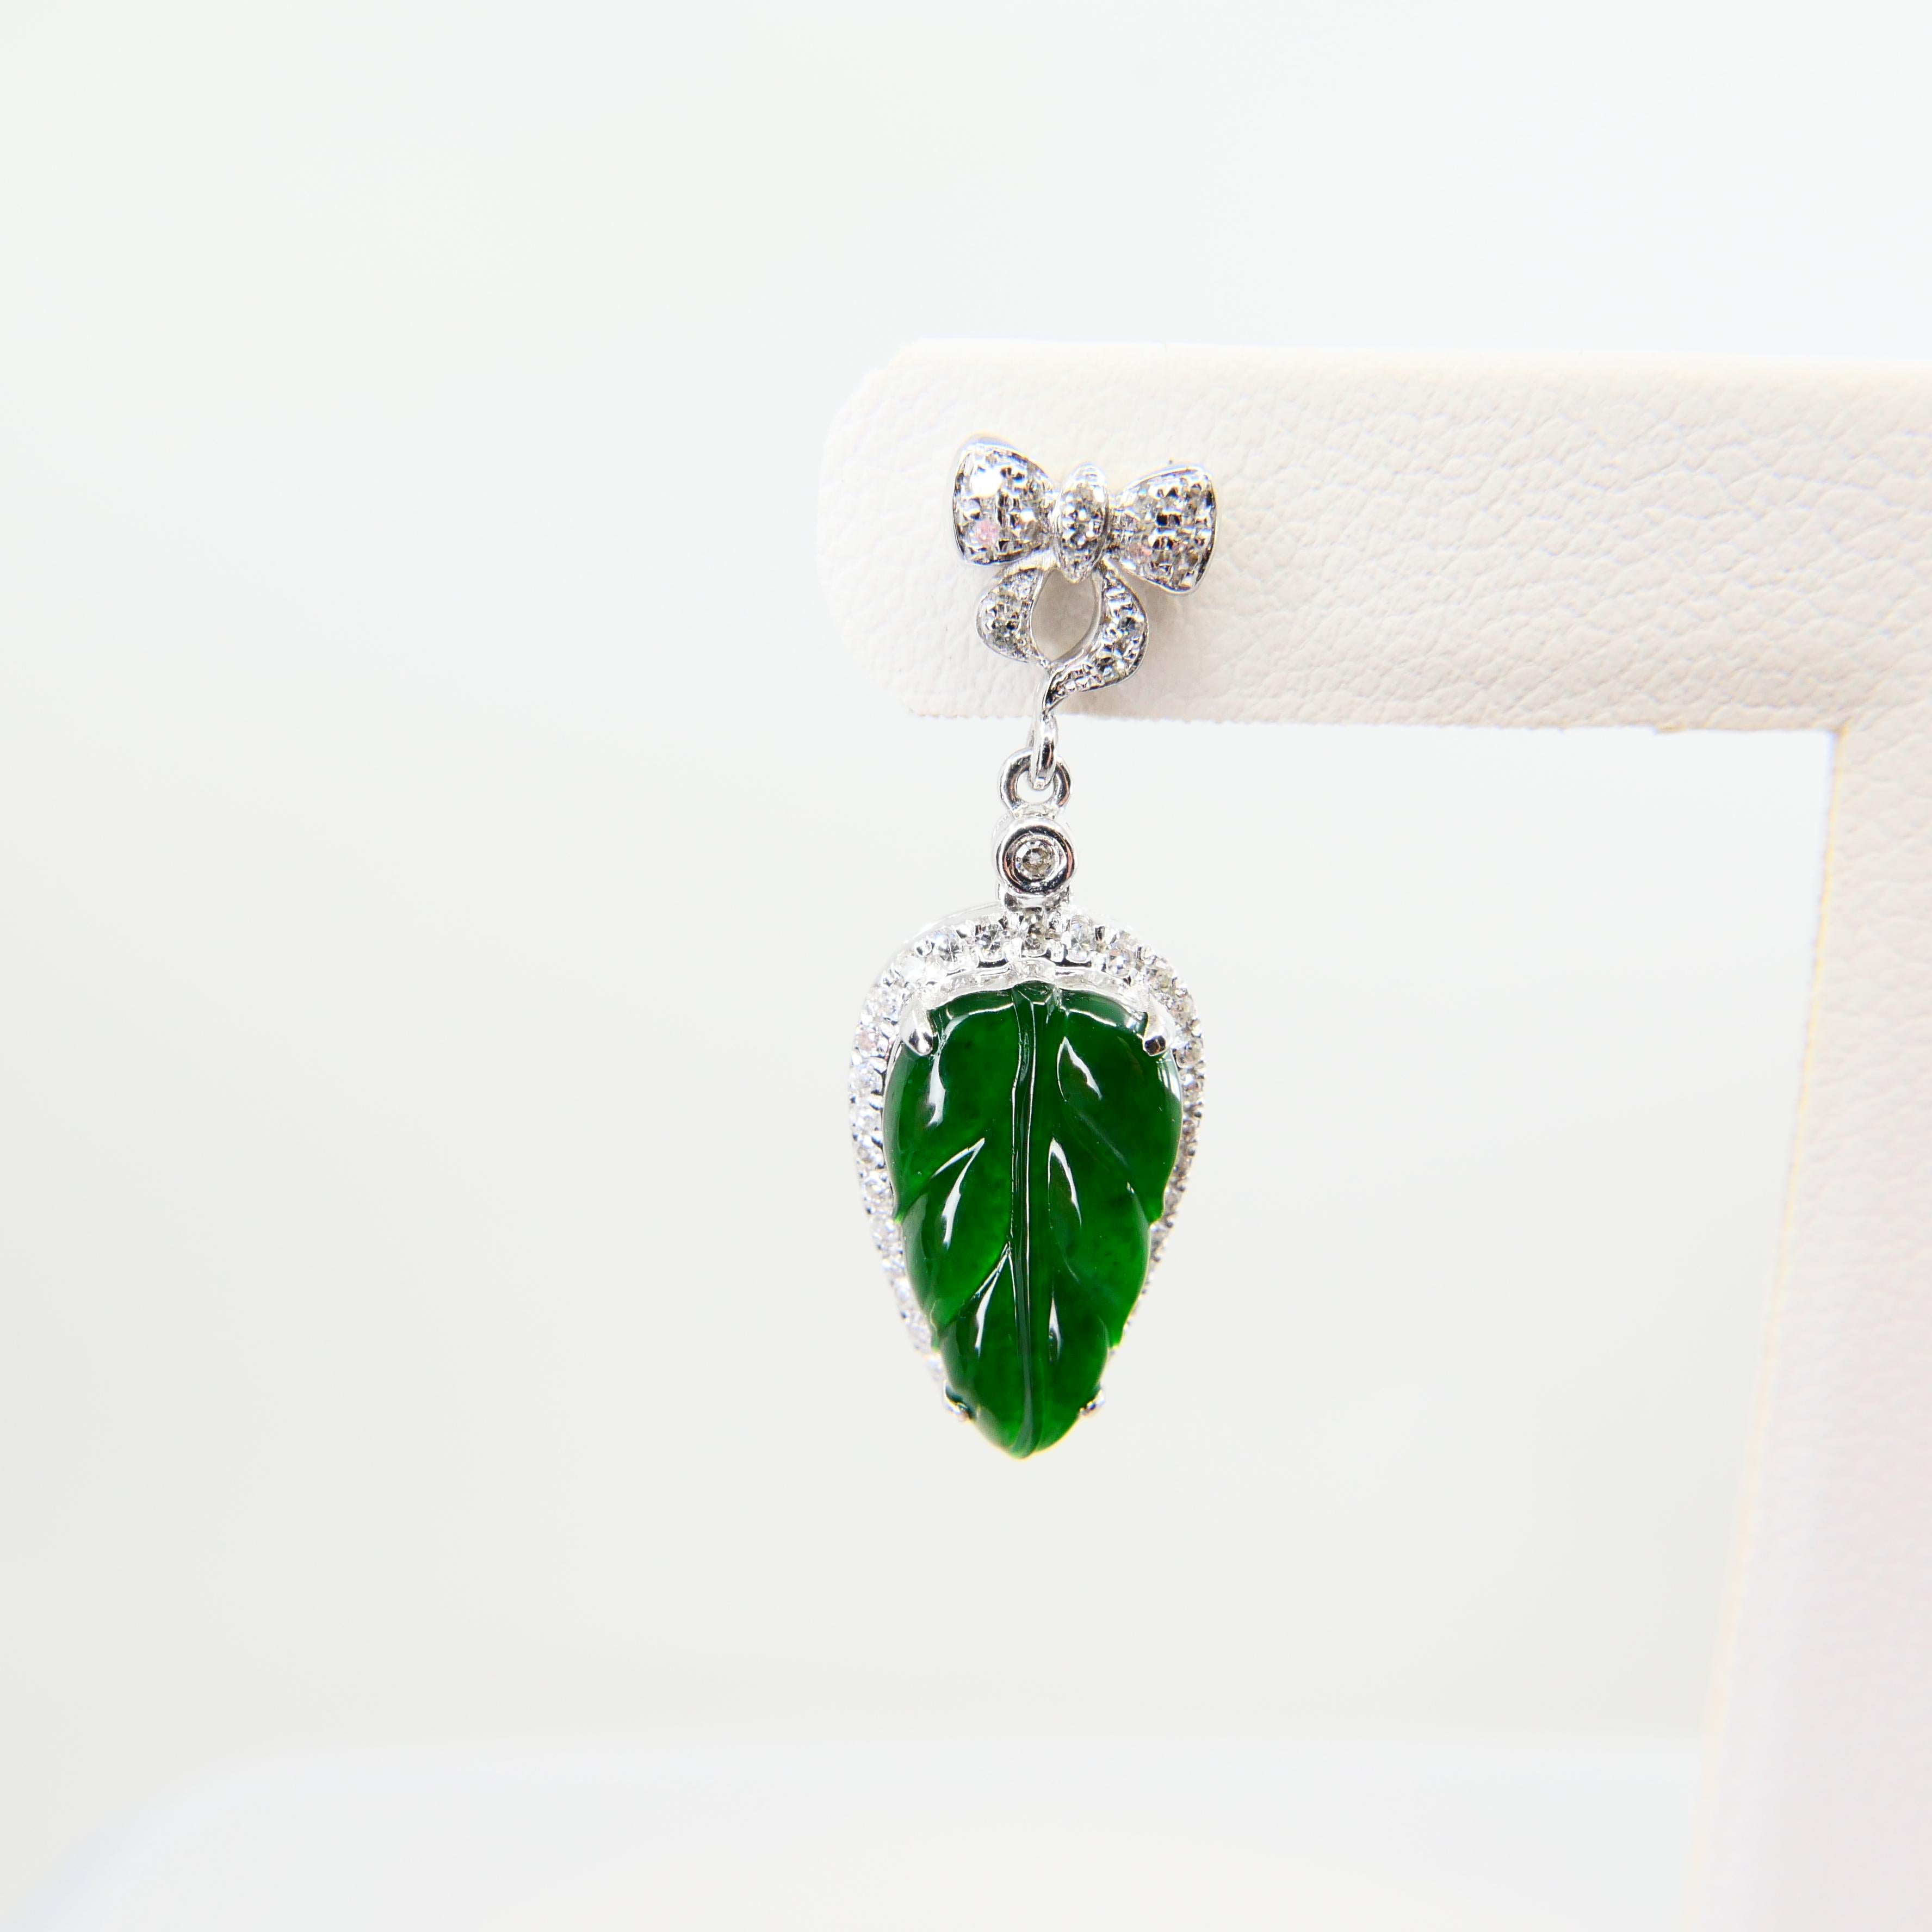 Certified Icy Imperial Green Jade & Diamond Earrings, Collector's Quality For Sale 3